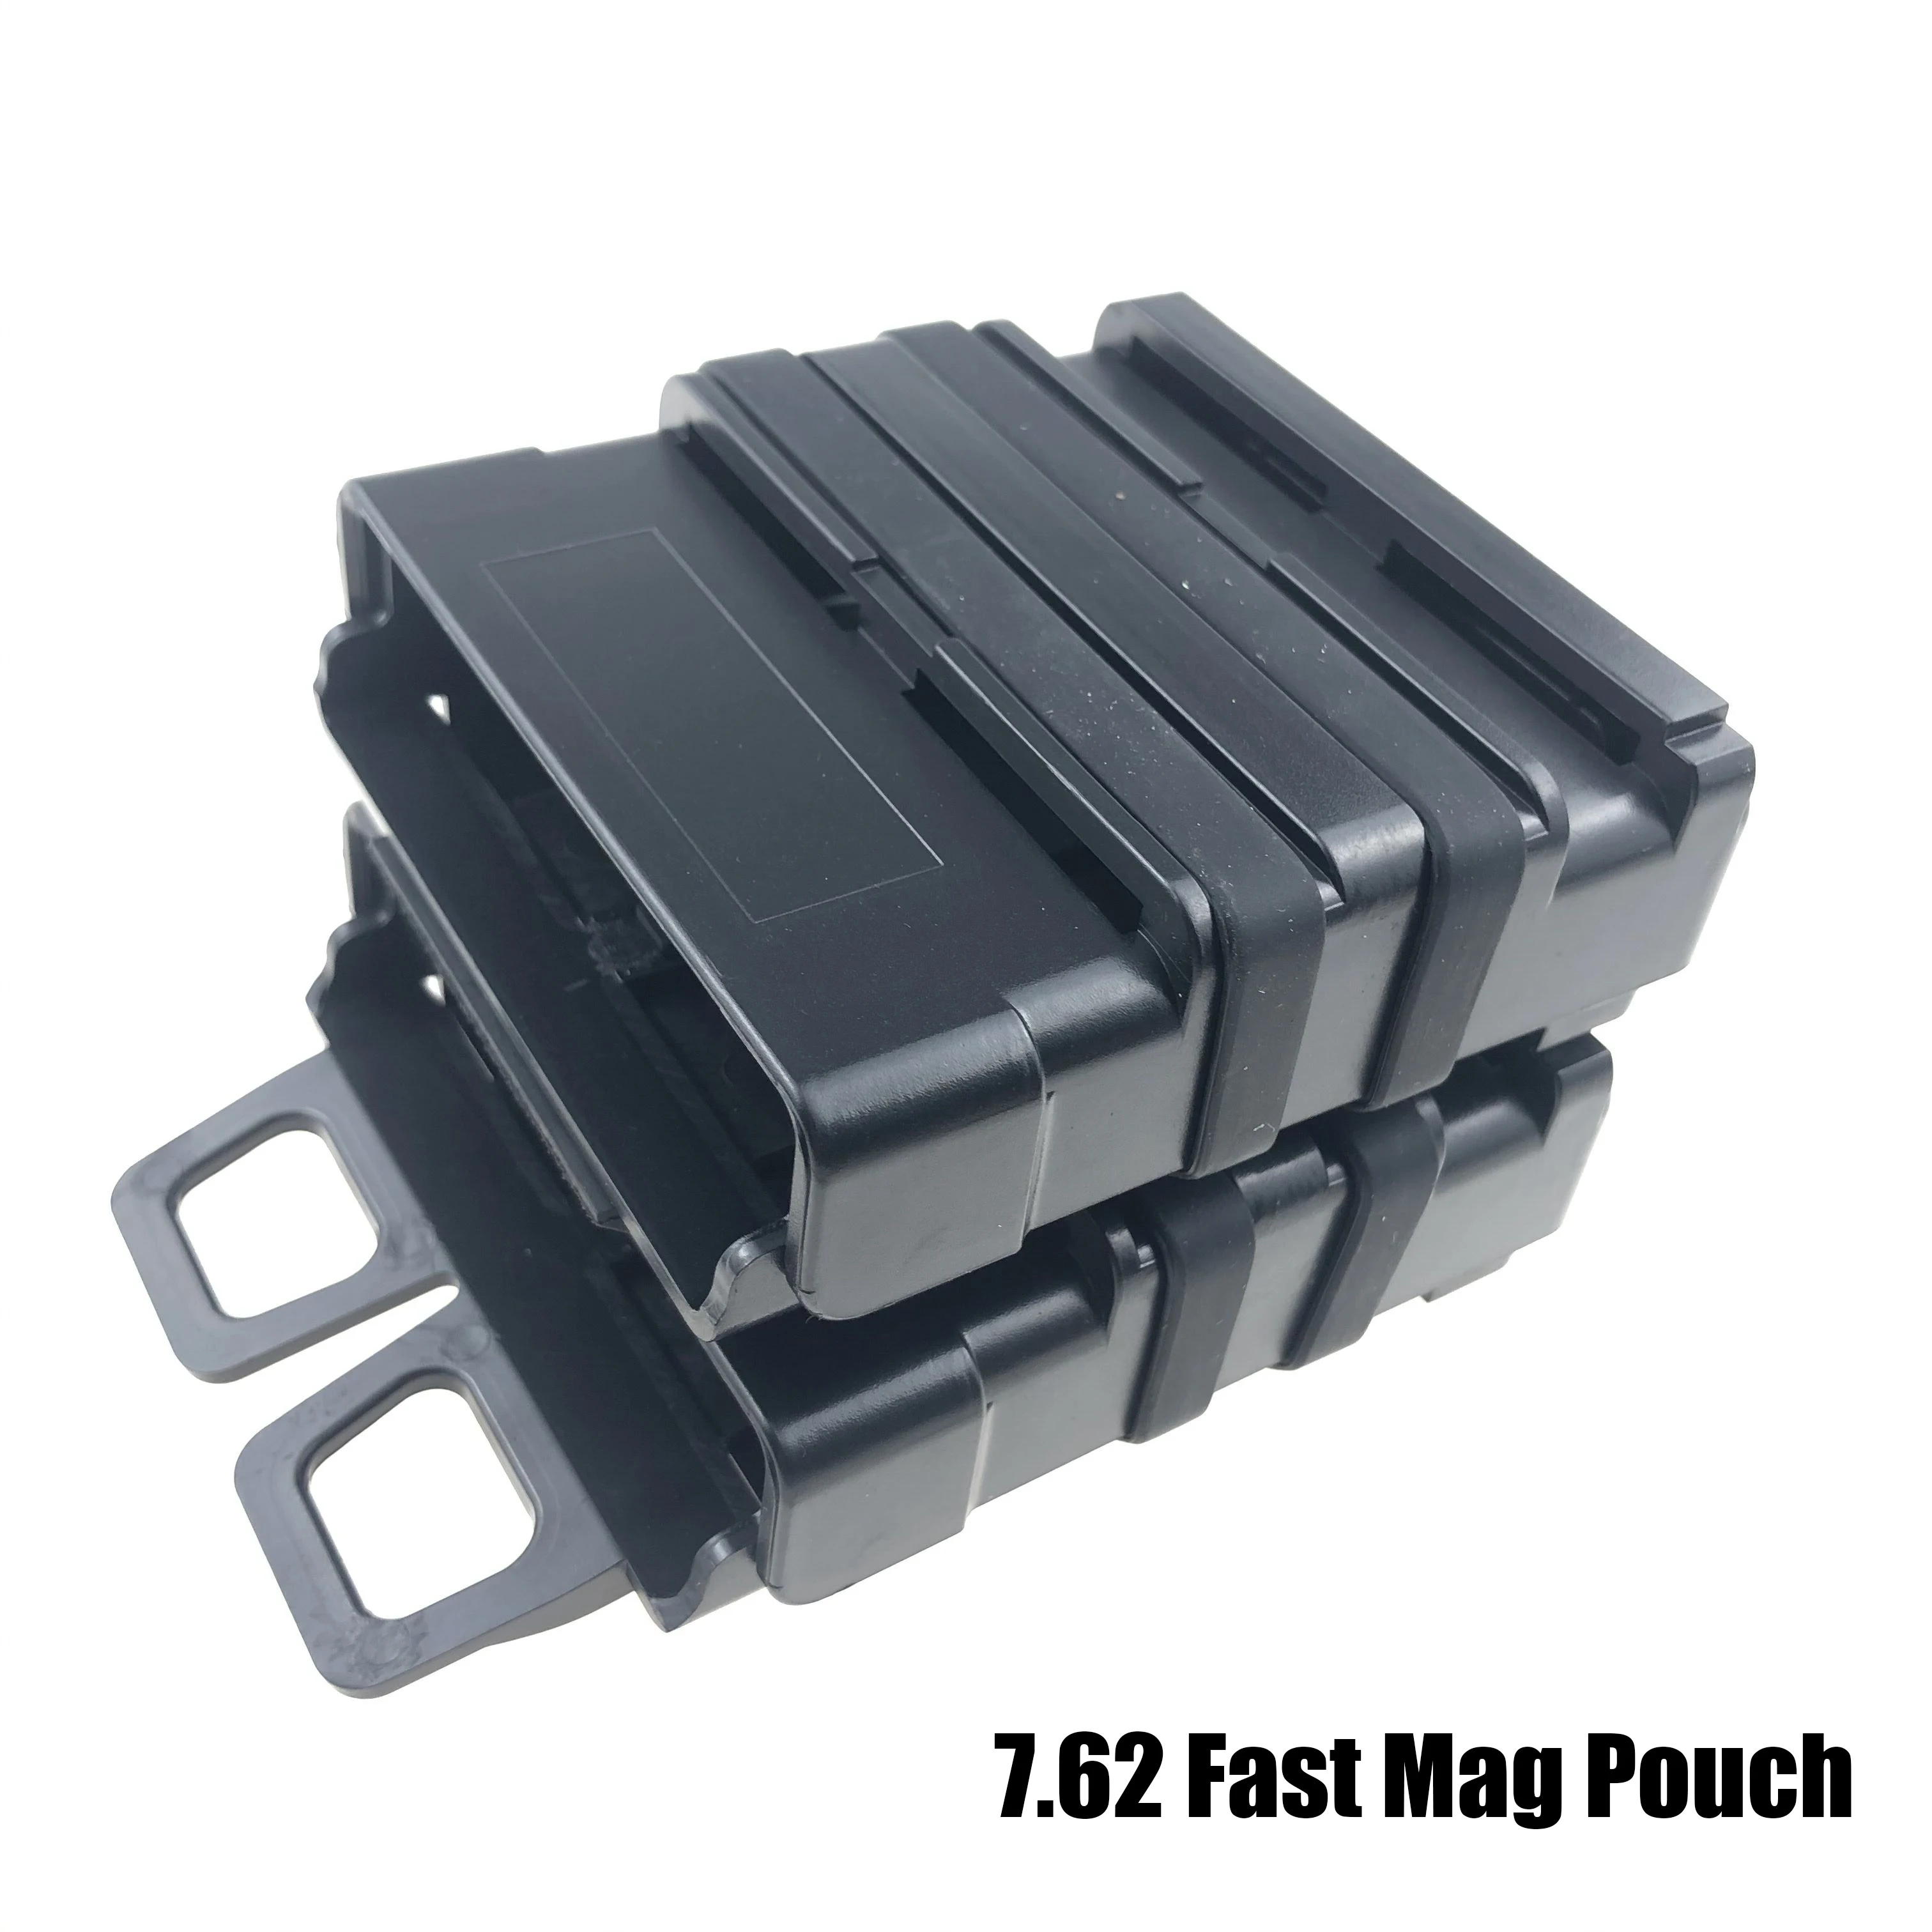 

Military Airsoft 7.62 Fast Mag Holder Molle Tactical FastMag Pouch Hunting Accessories AK AK47 Rifle Pistol Magazine Pouch